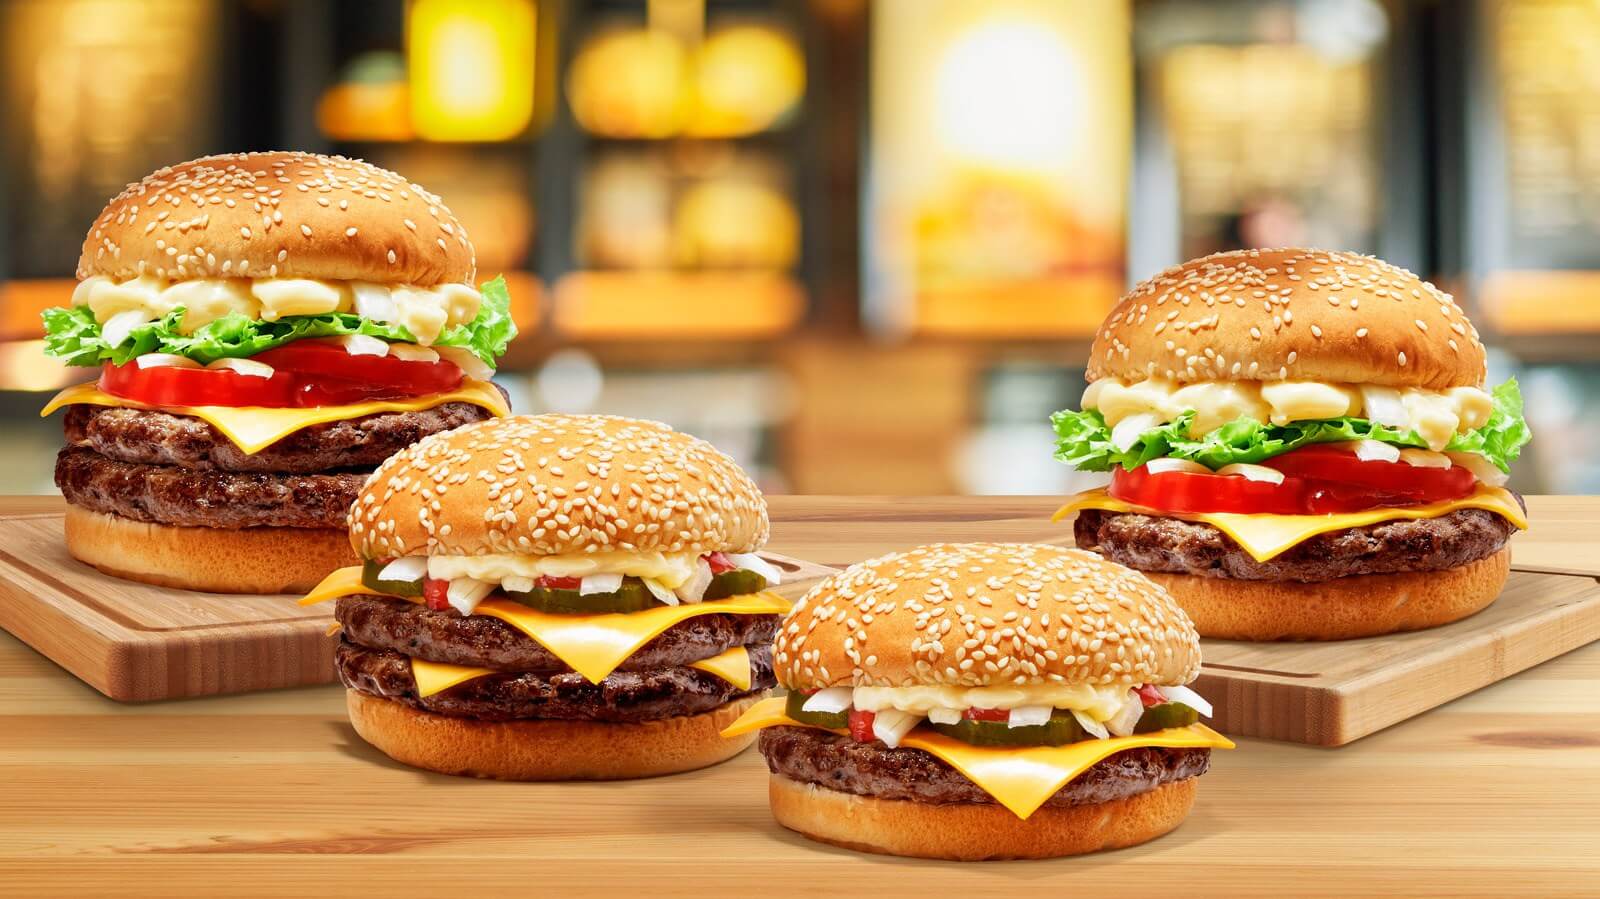 10-burger-king-double-cheeseburger-nutrition-facts